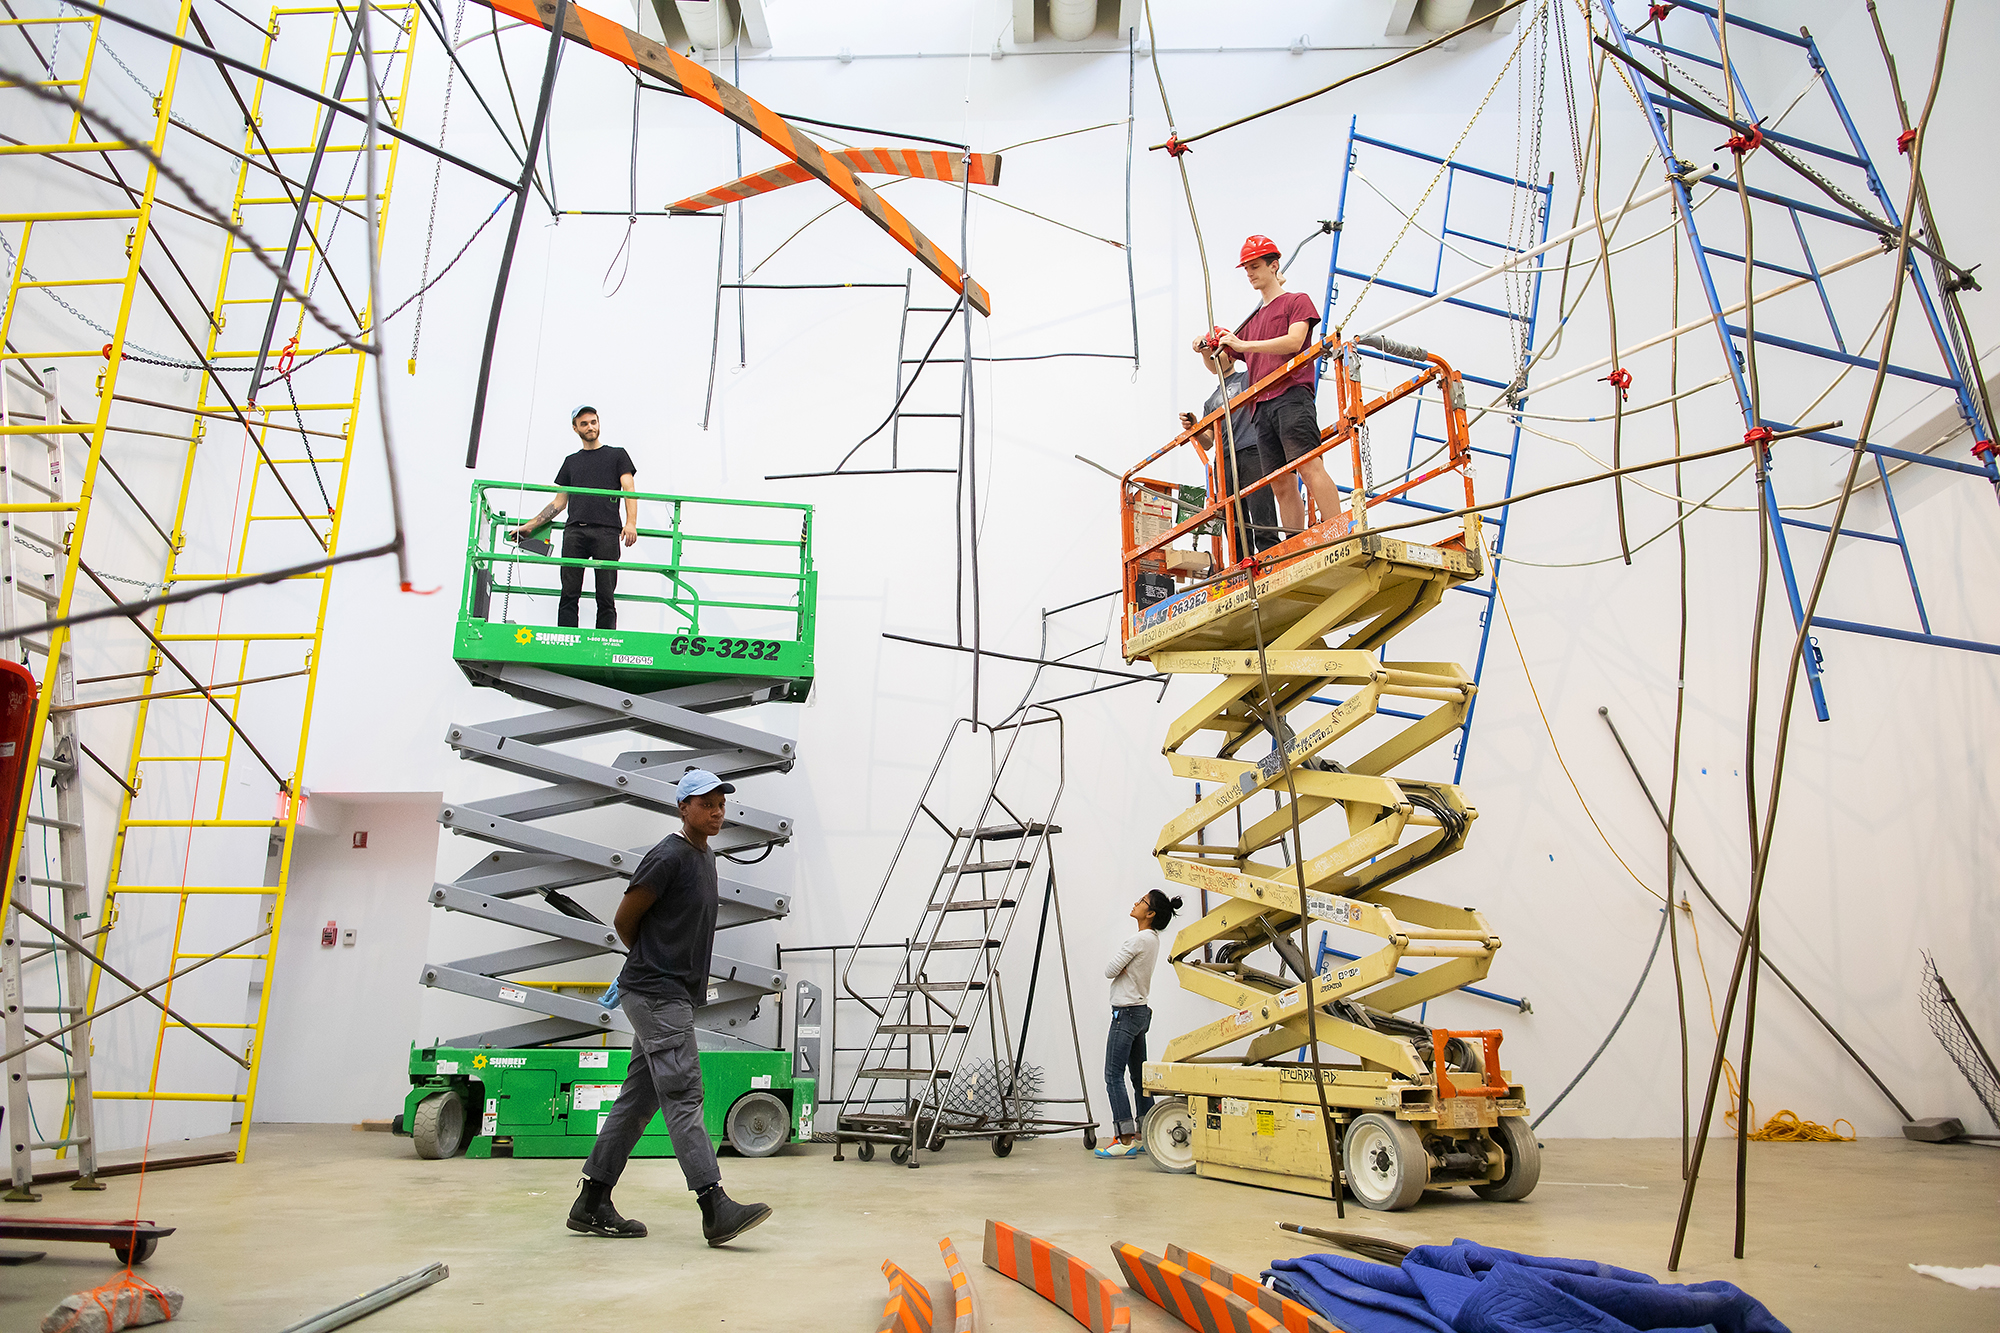 Construction materials hang in an art gallery during installation with two people up on lifts, one person walking, and the artist intently watching. 